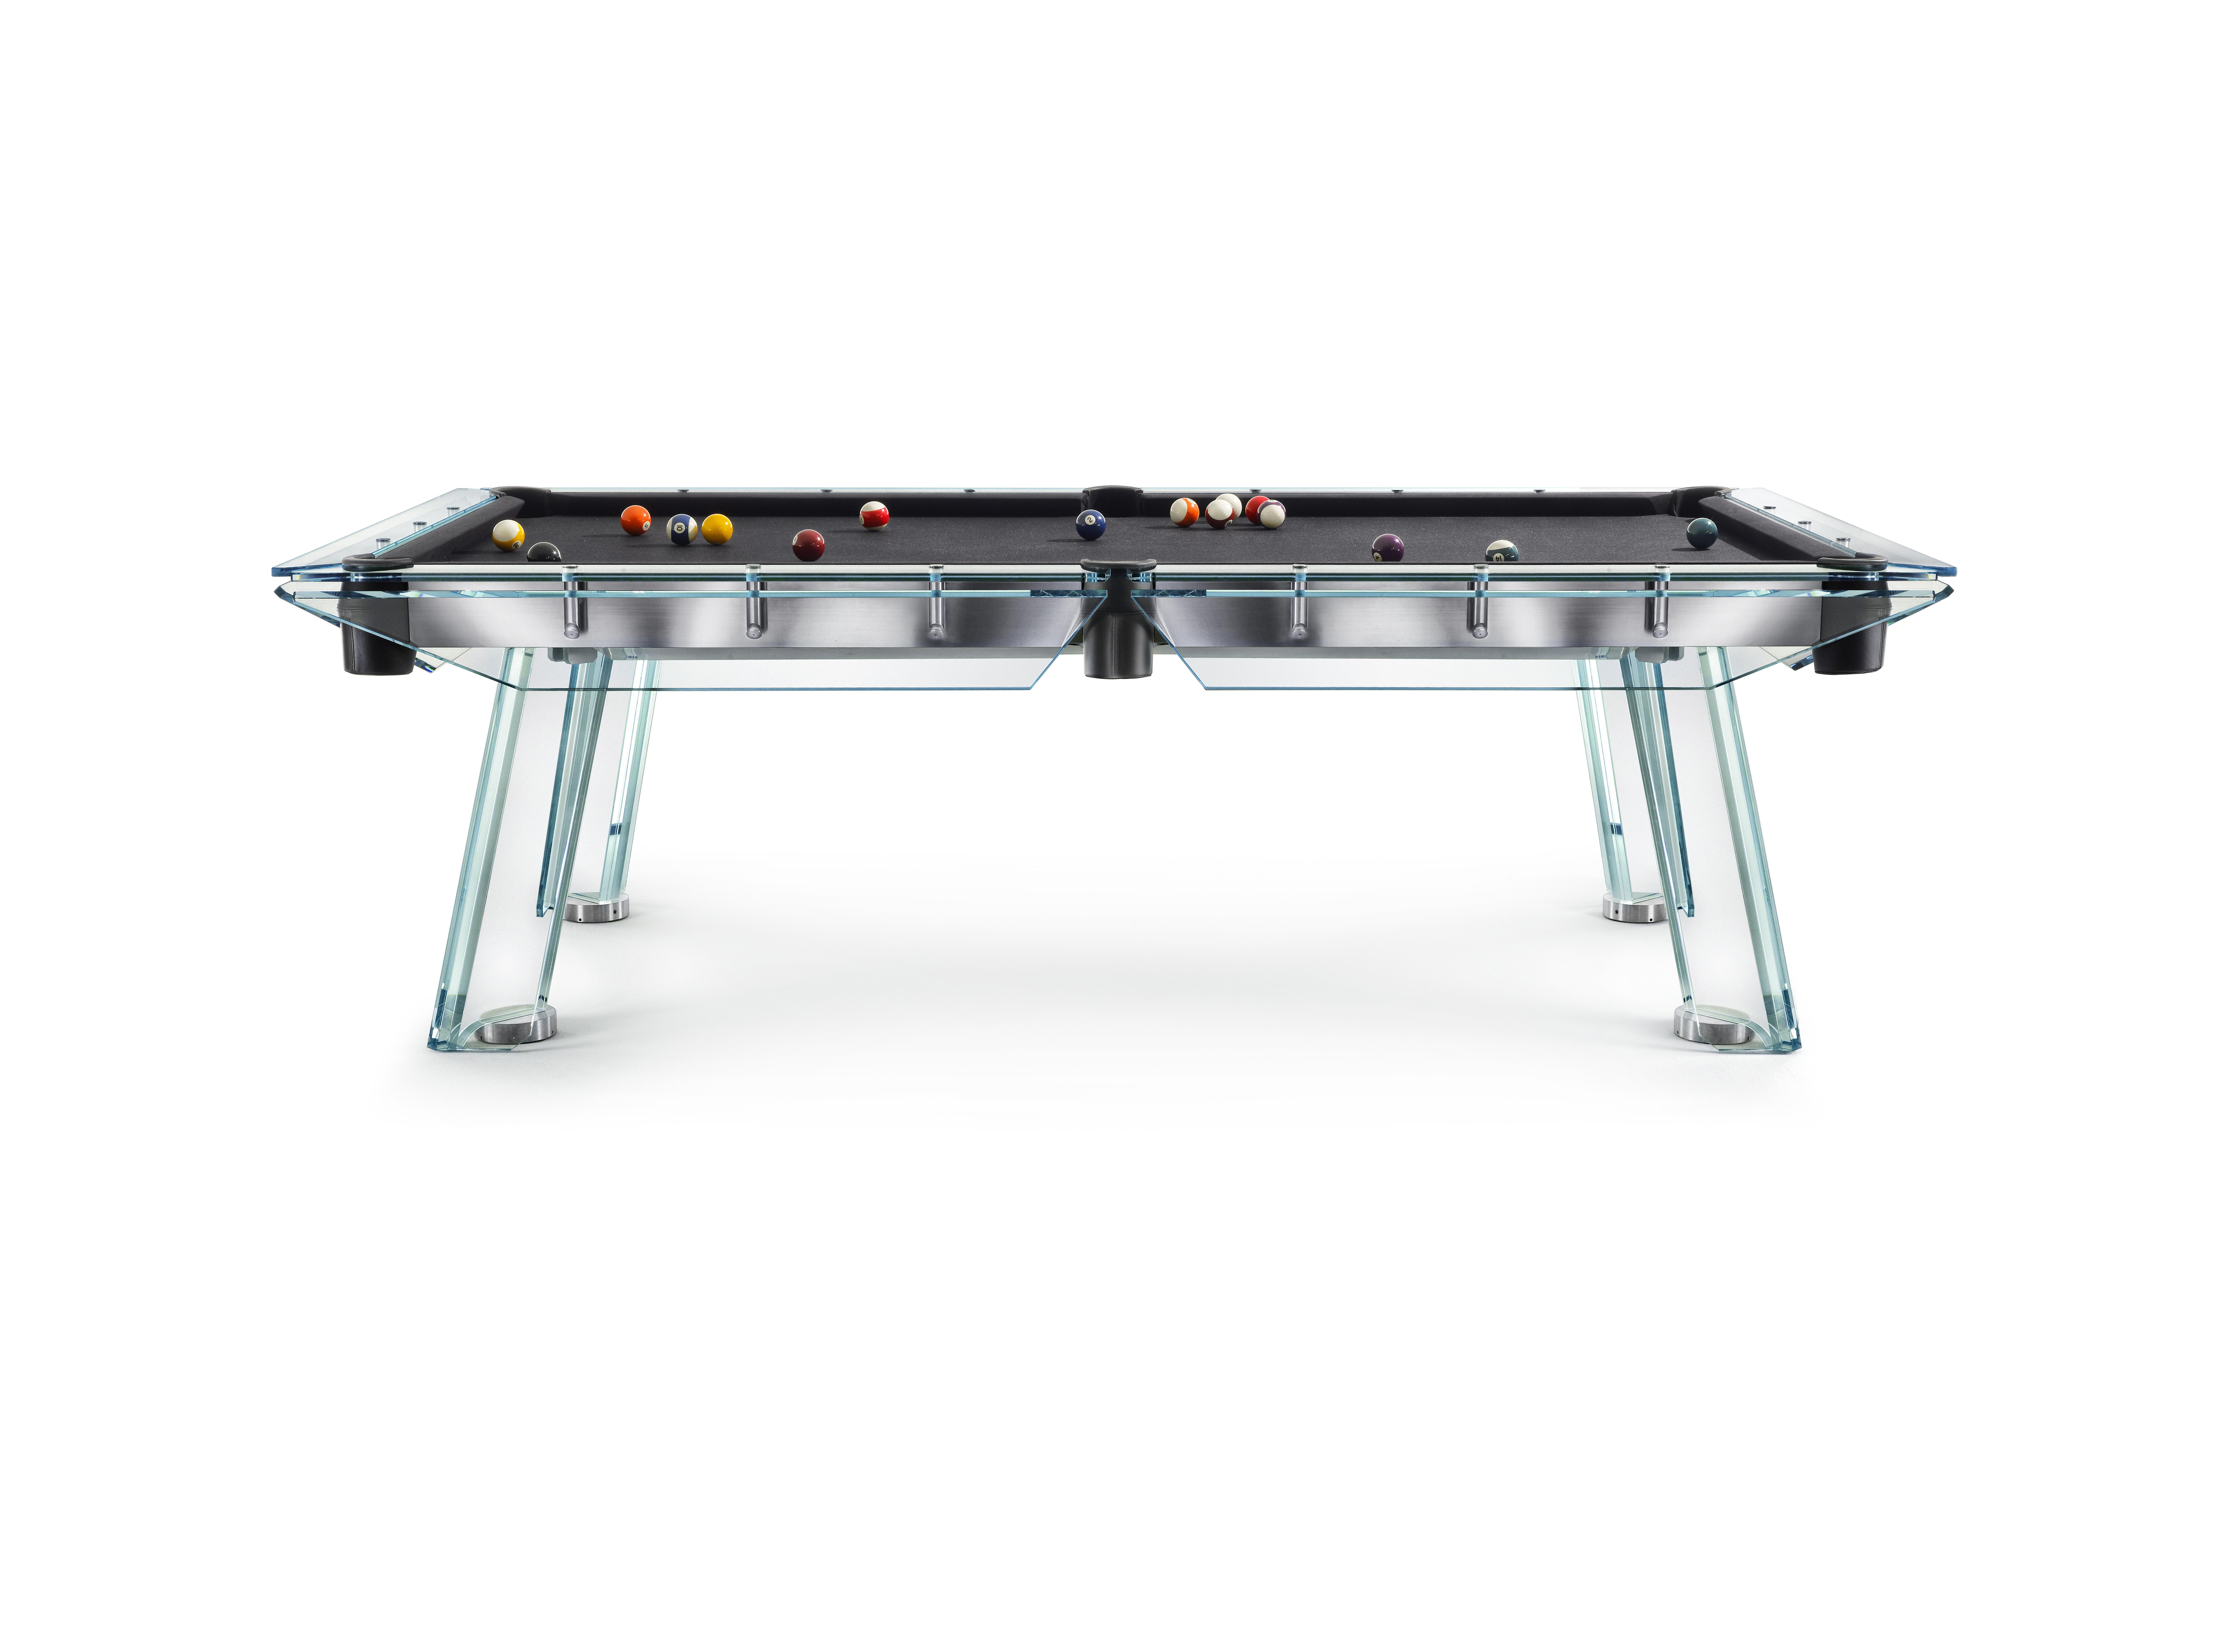 Post-Modern Filotto Classic Player Pool Table by Impatia